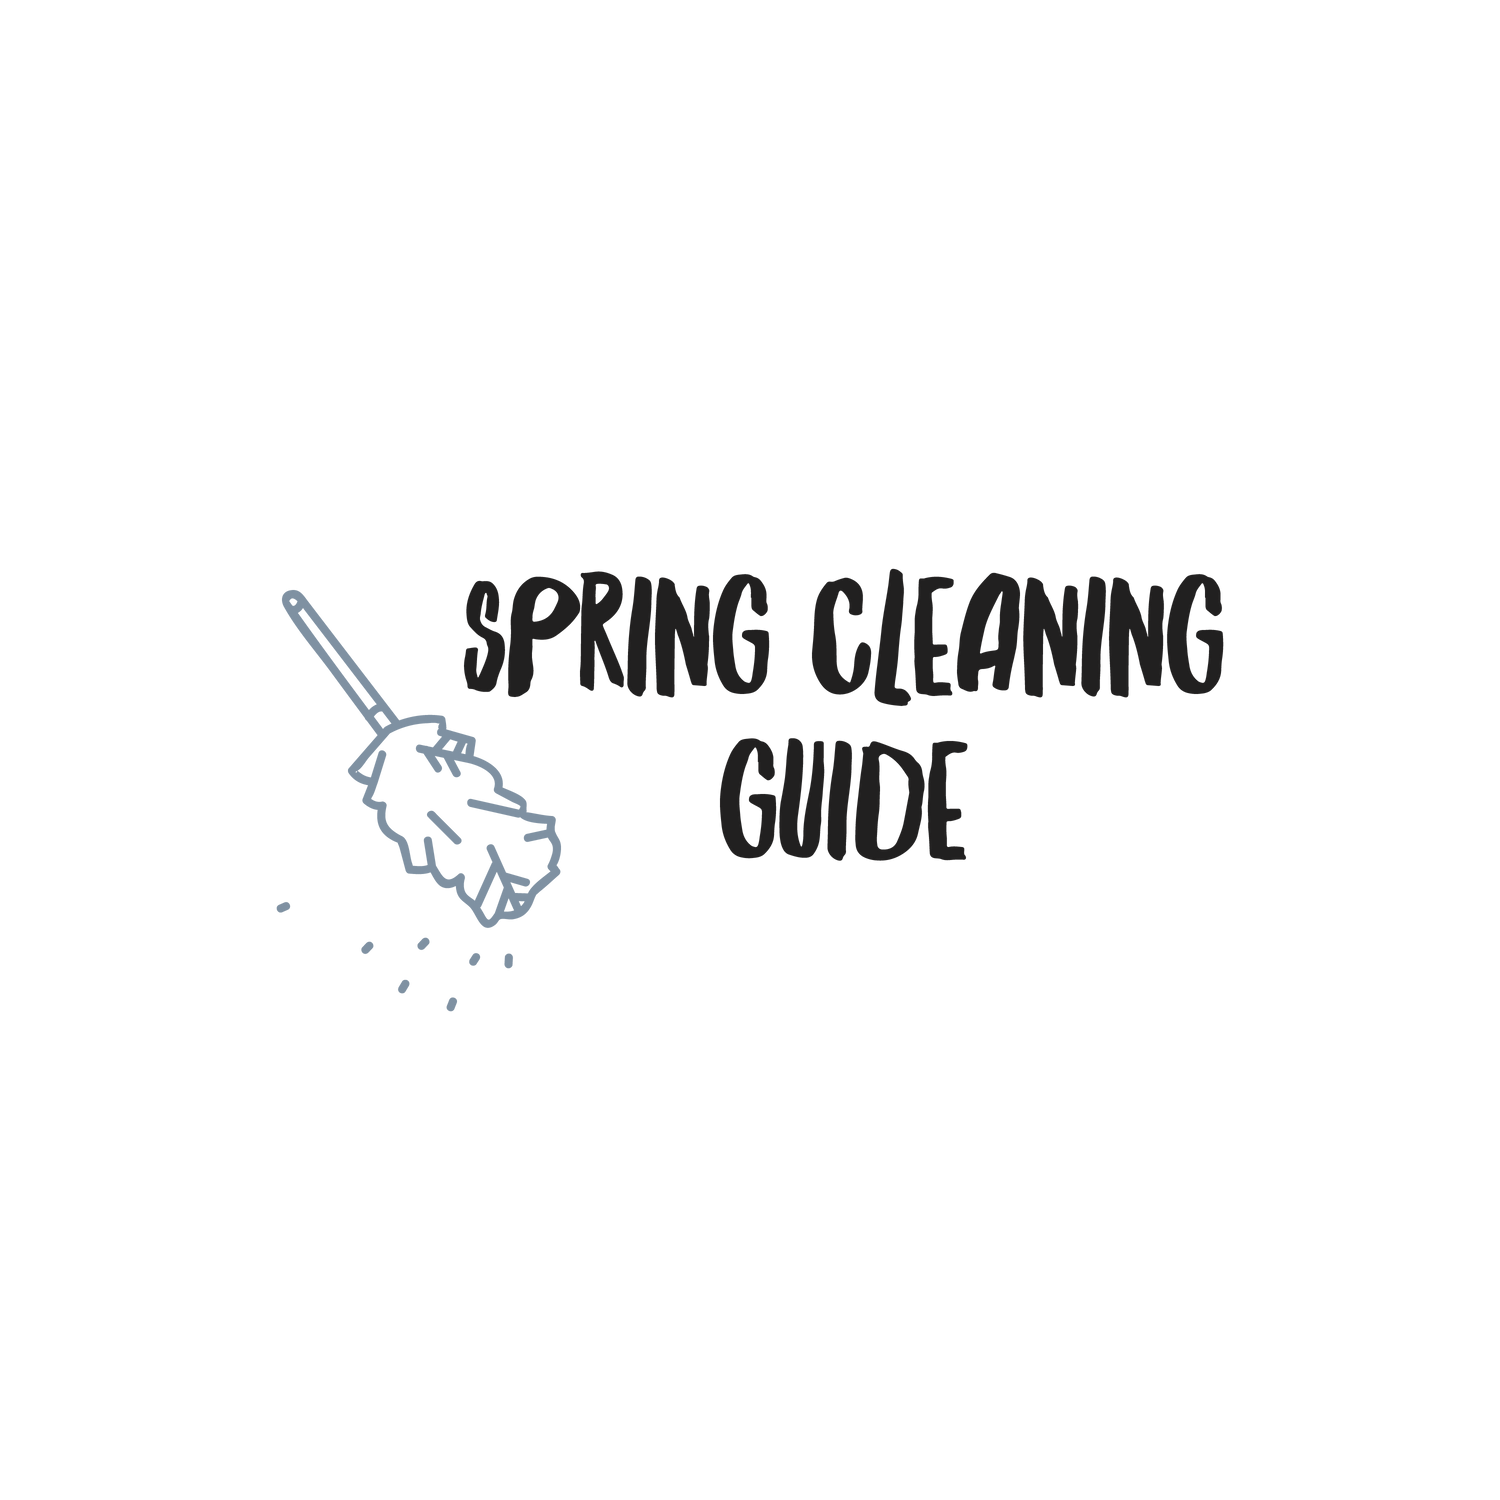 English version of the spring cleaning guide document made by Les Belles Combines